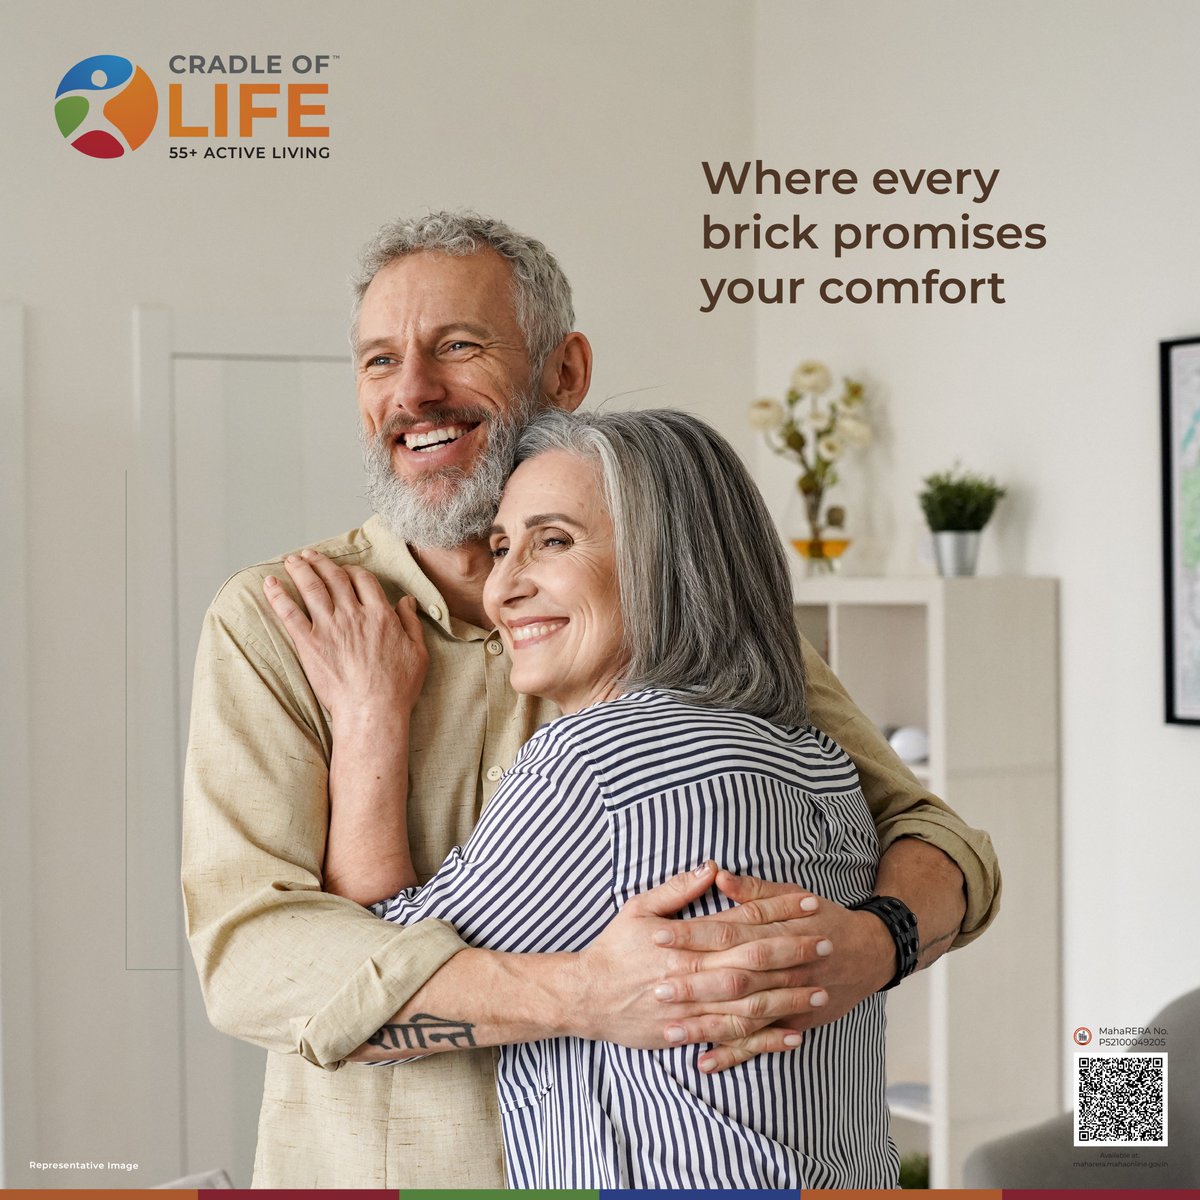 Embrace the essence of living with Cradle of Life, where each moment resonates with safety, comfort, and active-living.

MahaRERA No: P52100049205

#JoyfulLiving #ActiveLiving #DynamicLiving #CradleOfLife #SeniorLiving #TimeForYourself